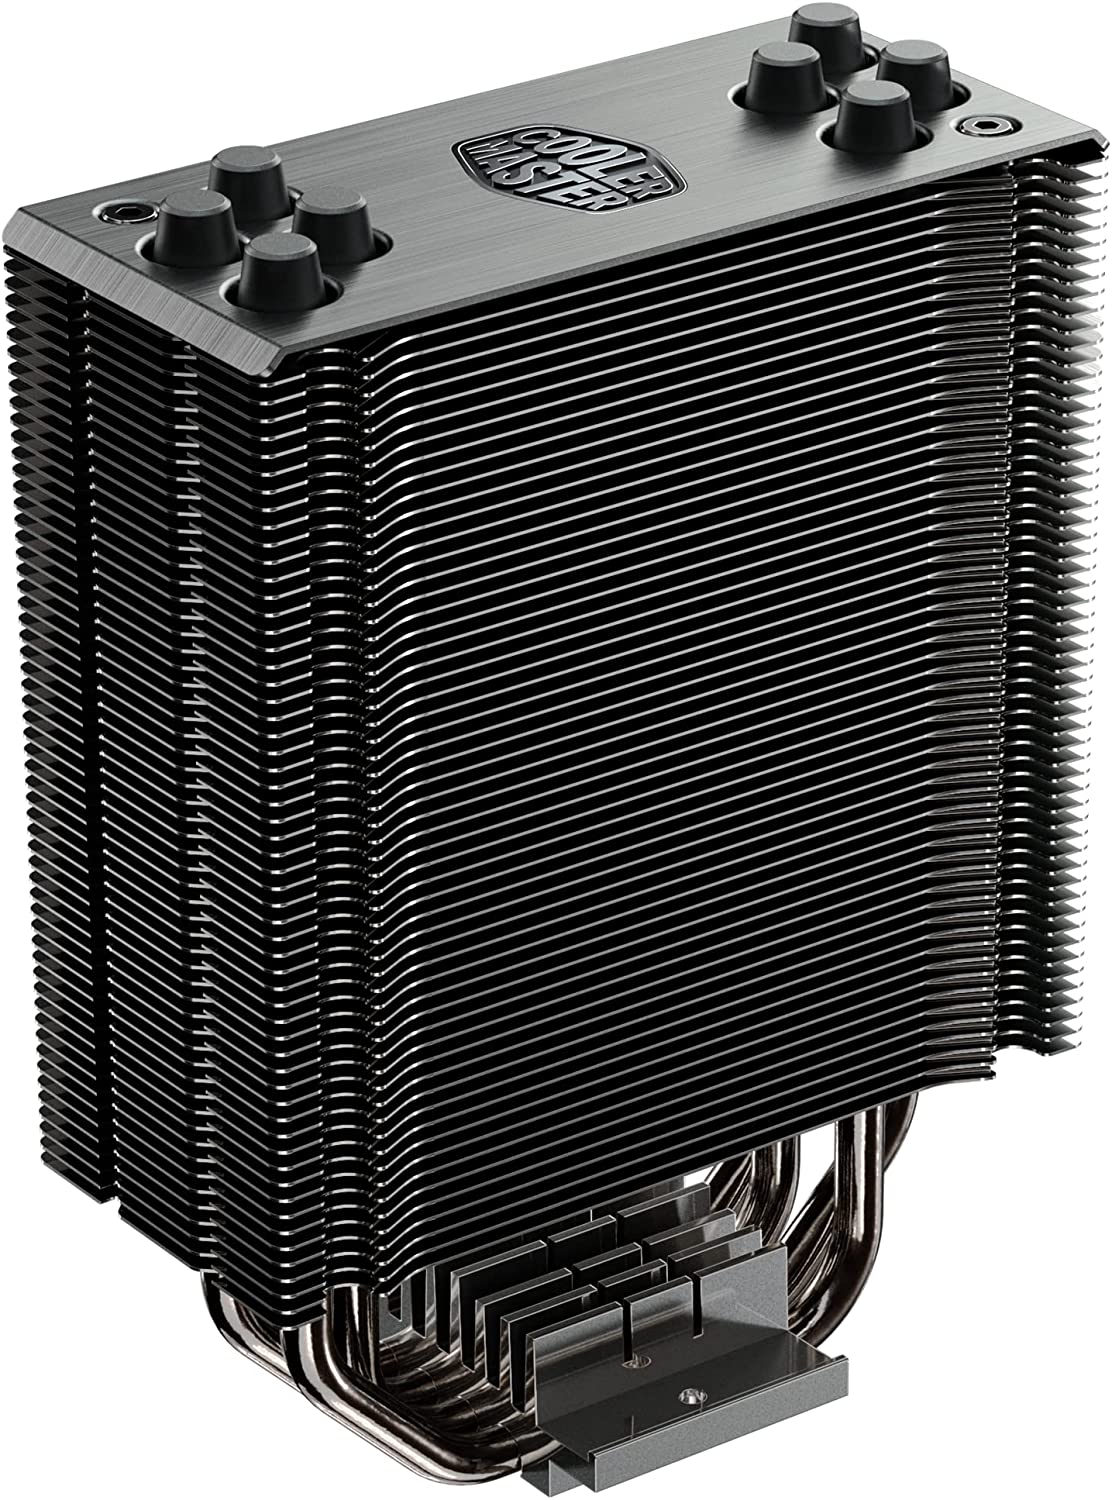 Cooler Master Hyper 212 Black Edition RGB CPU Air Cooler, SF120R RGB Fan, Anodized Gun-Metal Black, Brushed Nickel Fins, 4 Copper Direct Contact Heat Pipes...